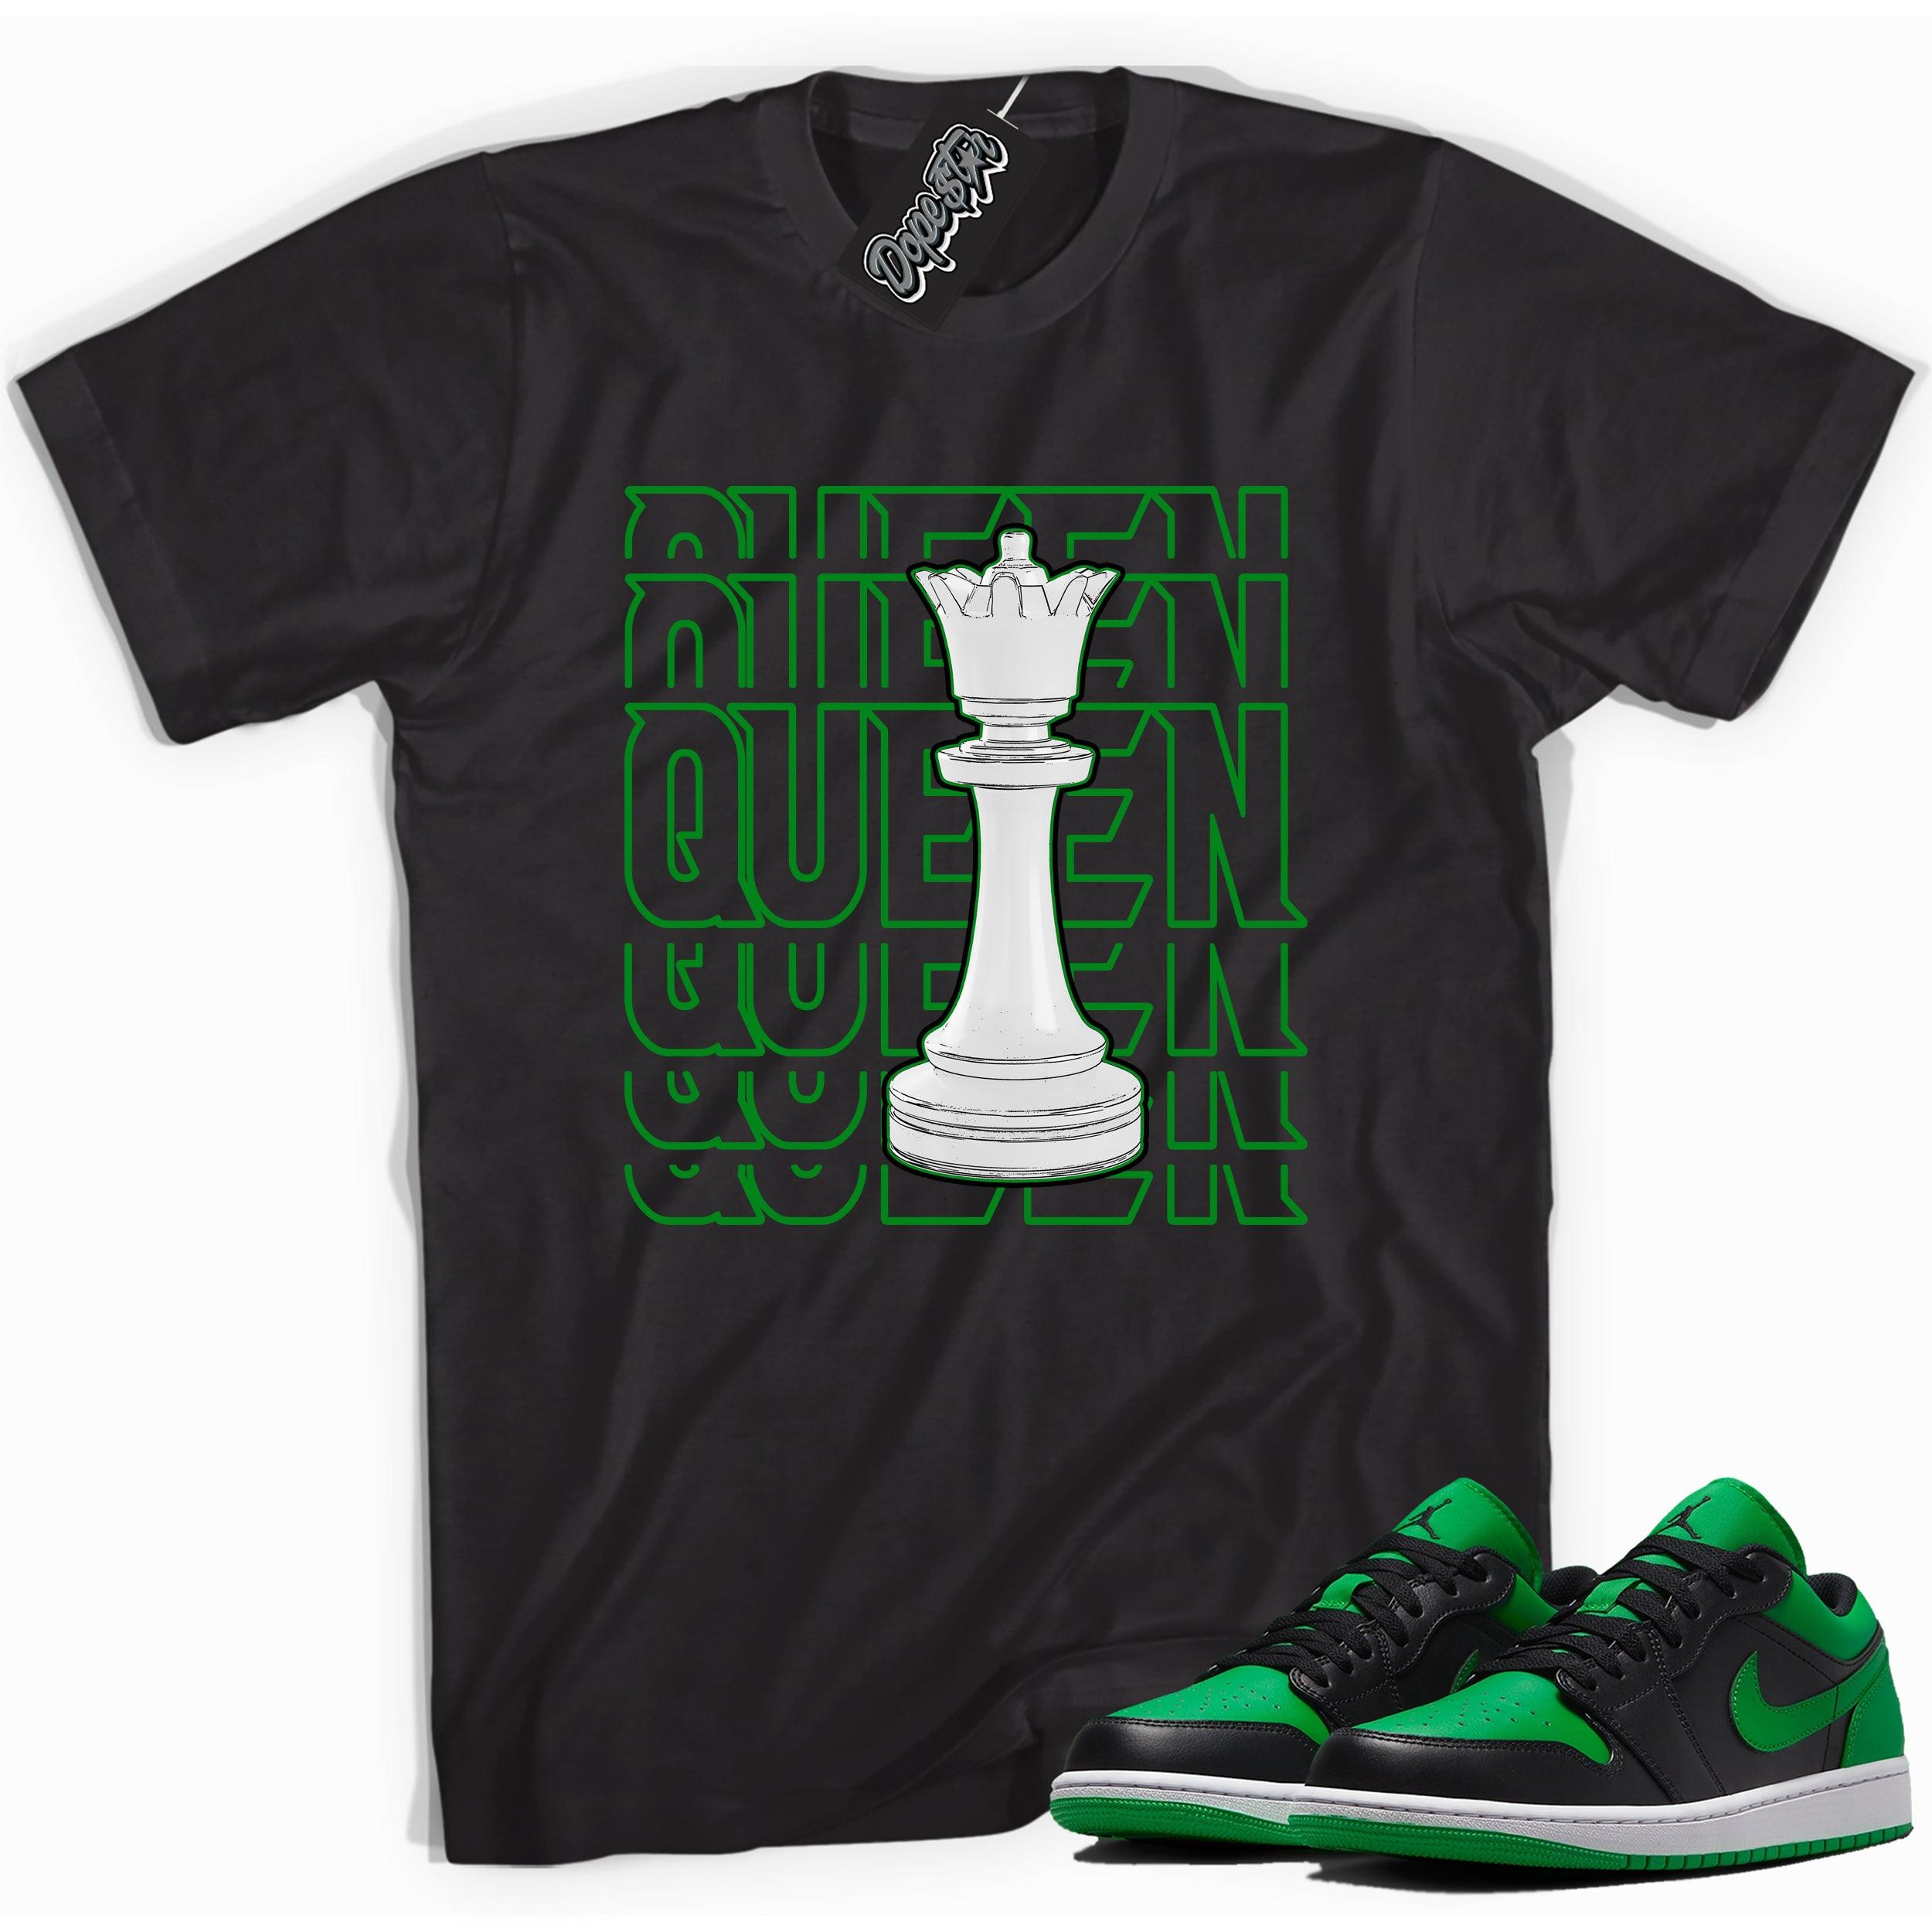 Cool black graphic tee with 'Queen' print, that perfectly matches Air Jordan 1 Low Lucky Green sneakers